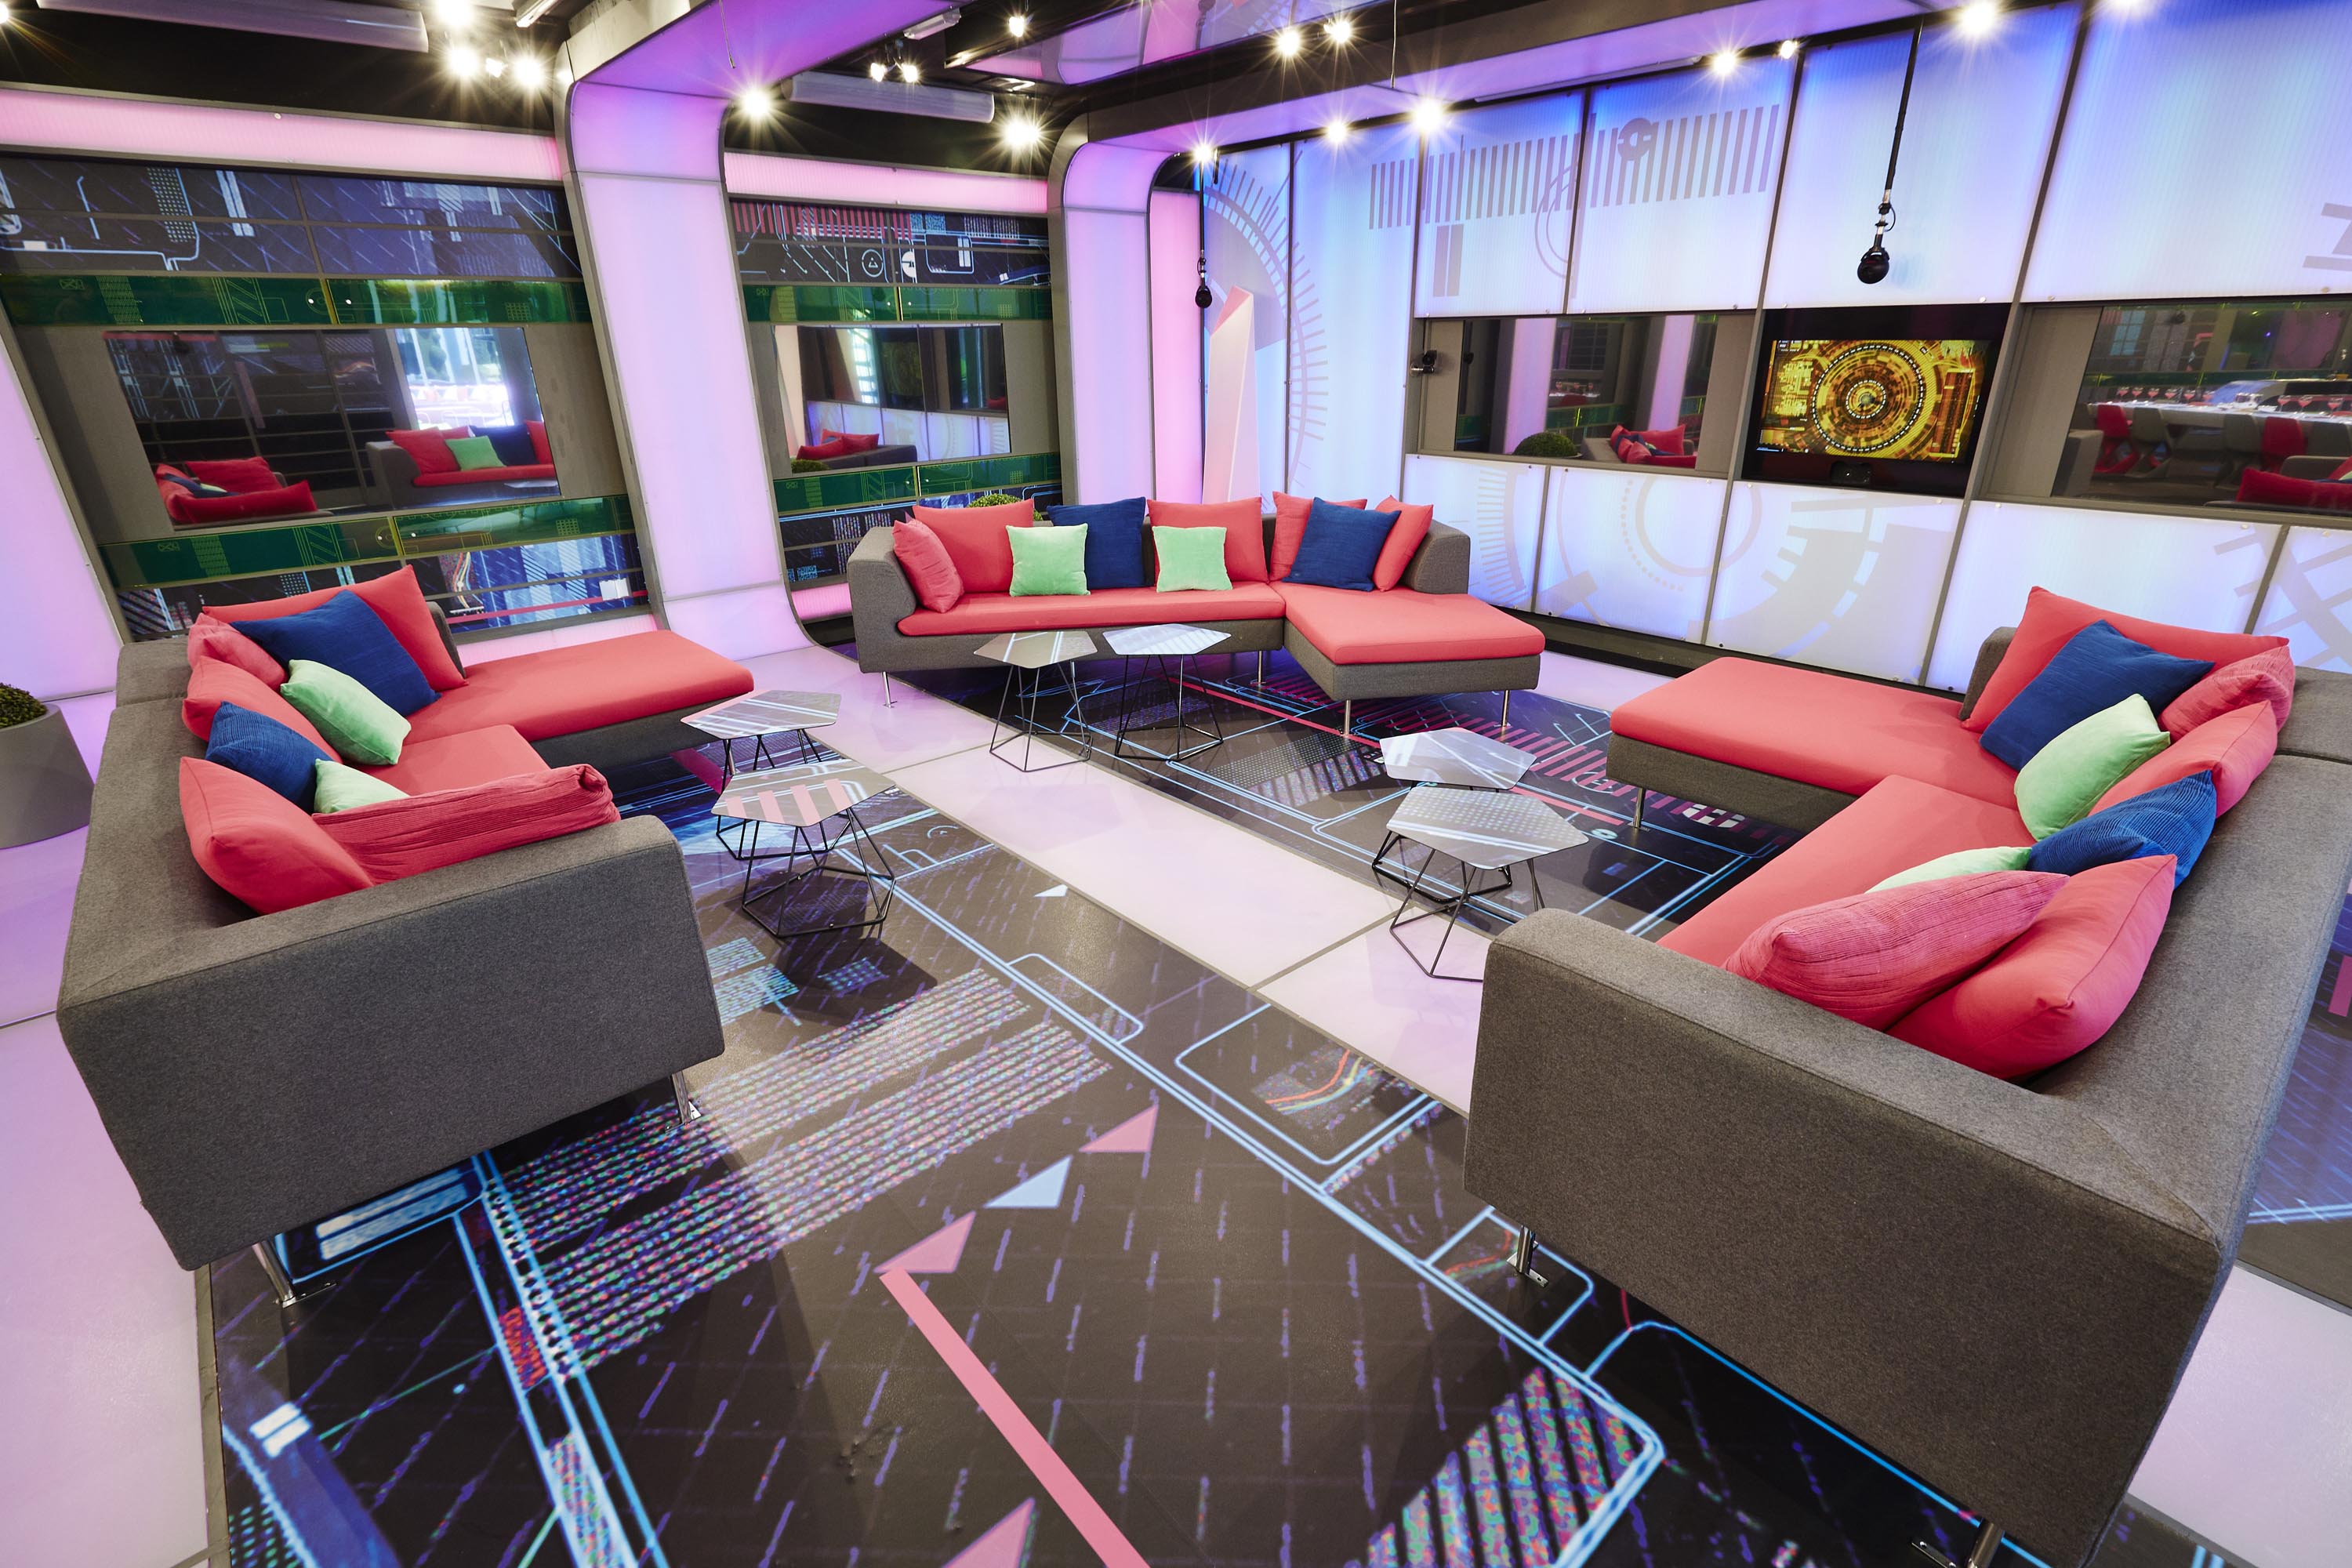 Day 1: Celebrity Big Brother House pictures revealed